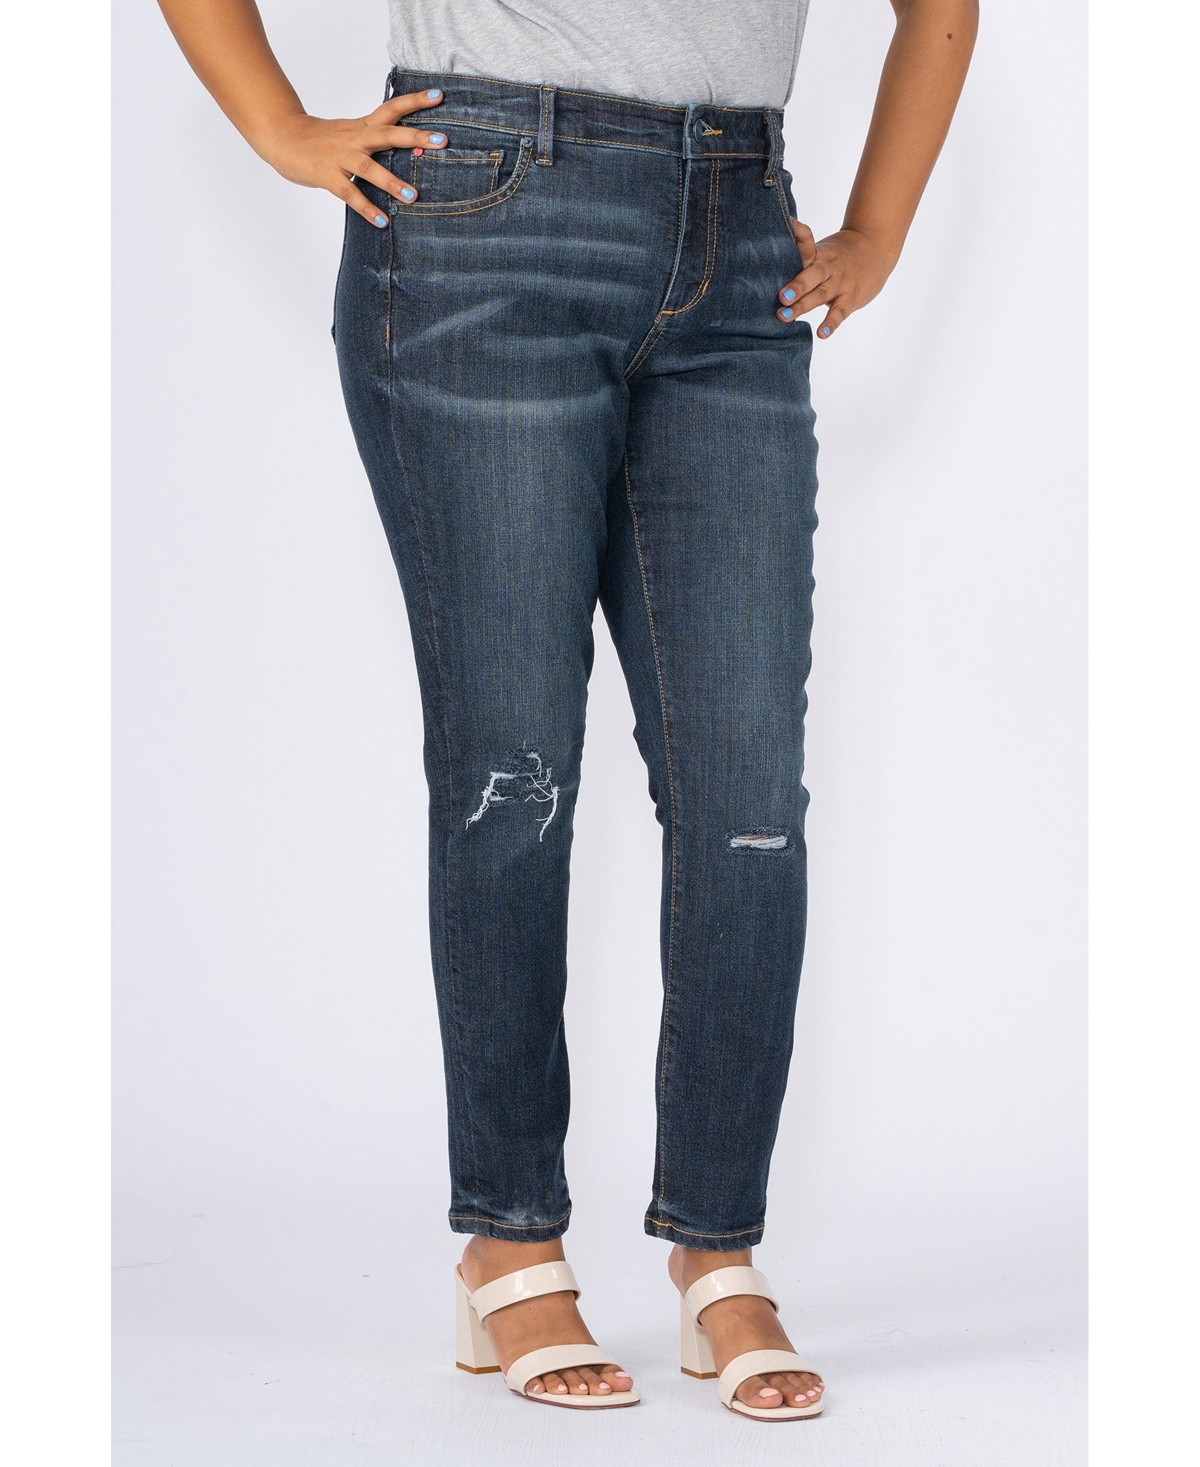 Women's High Rise Ankle Skinny Jeans - Carter